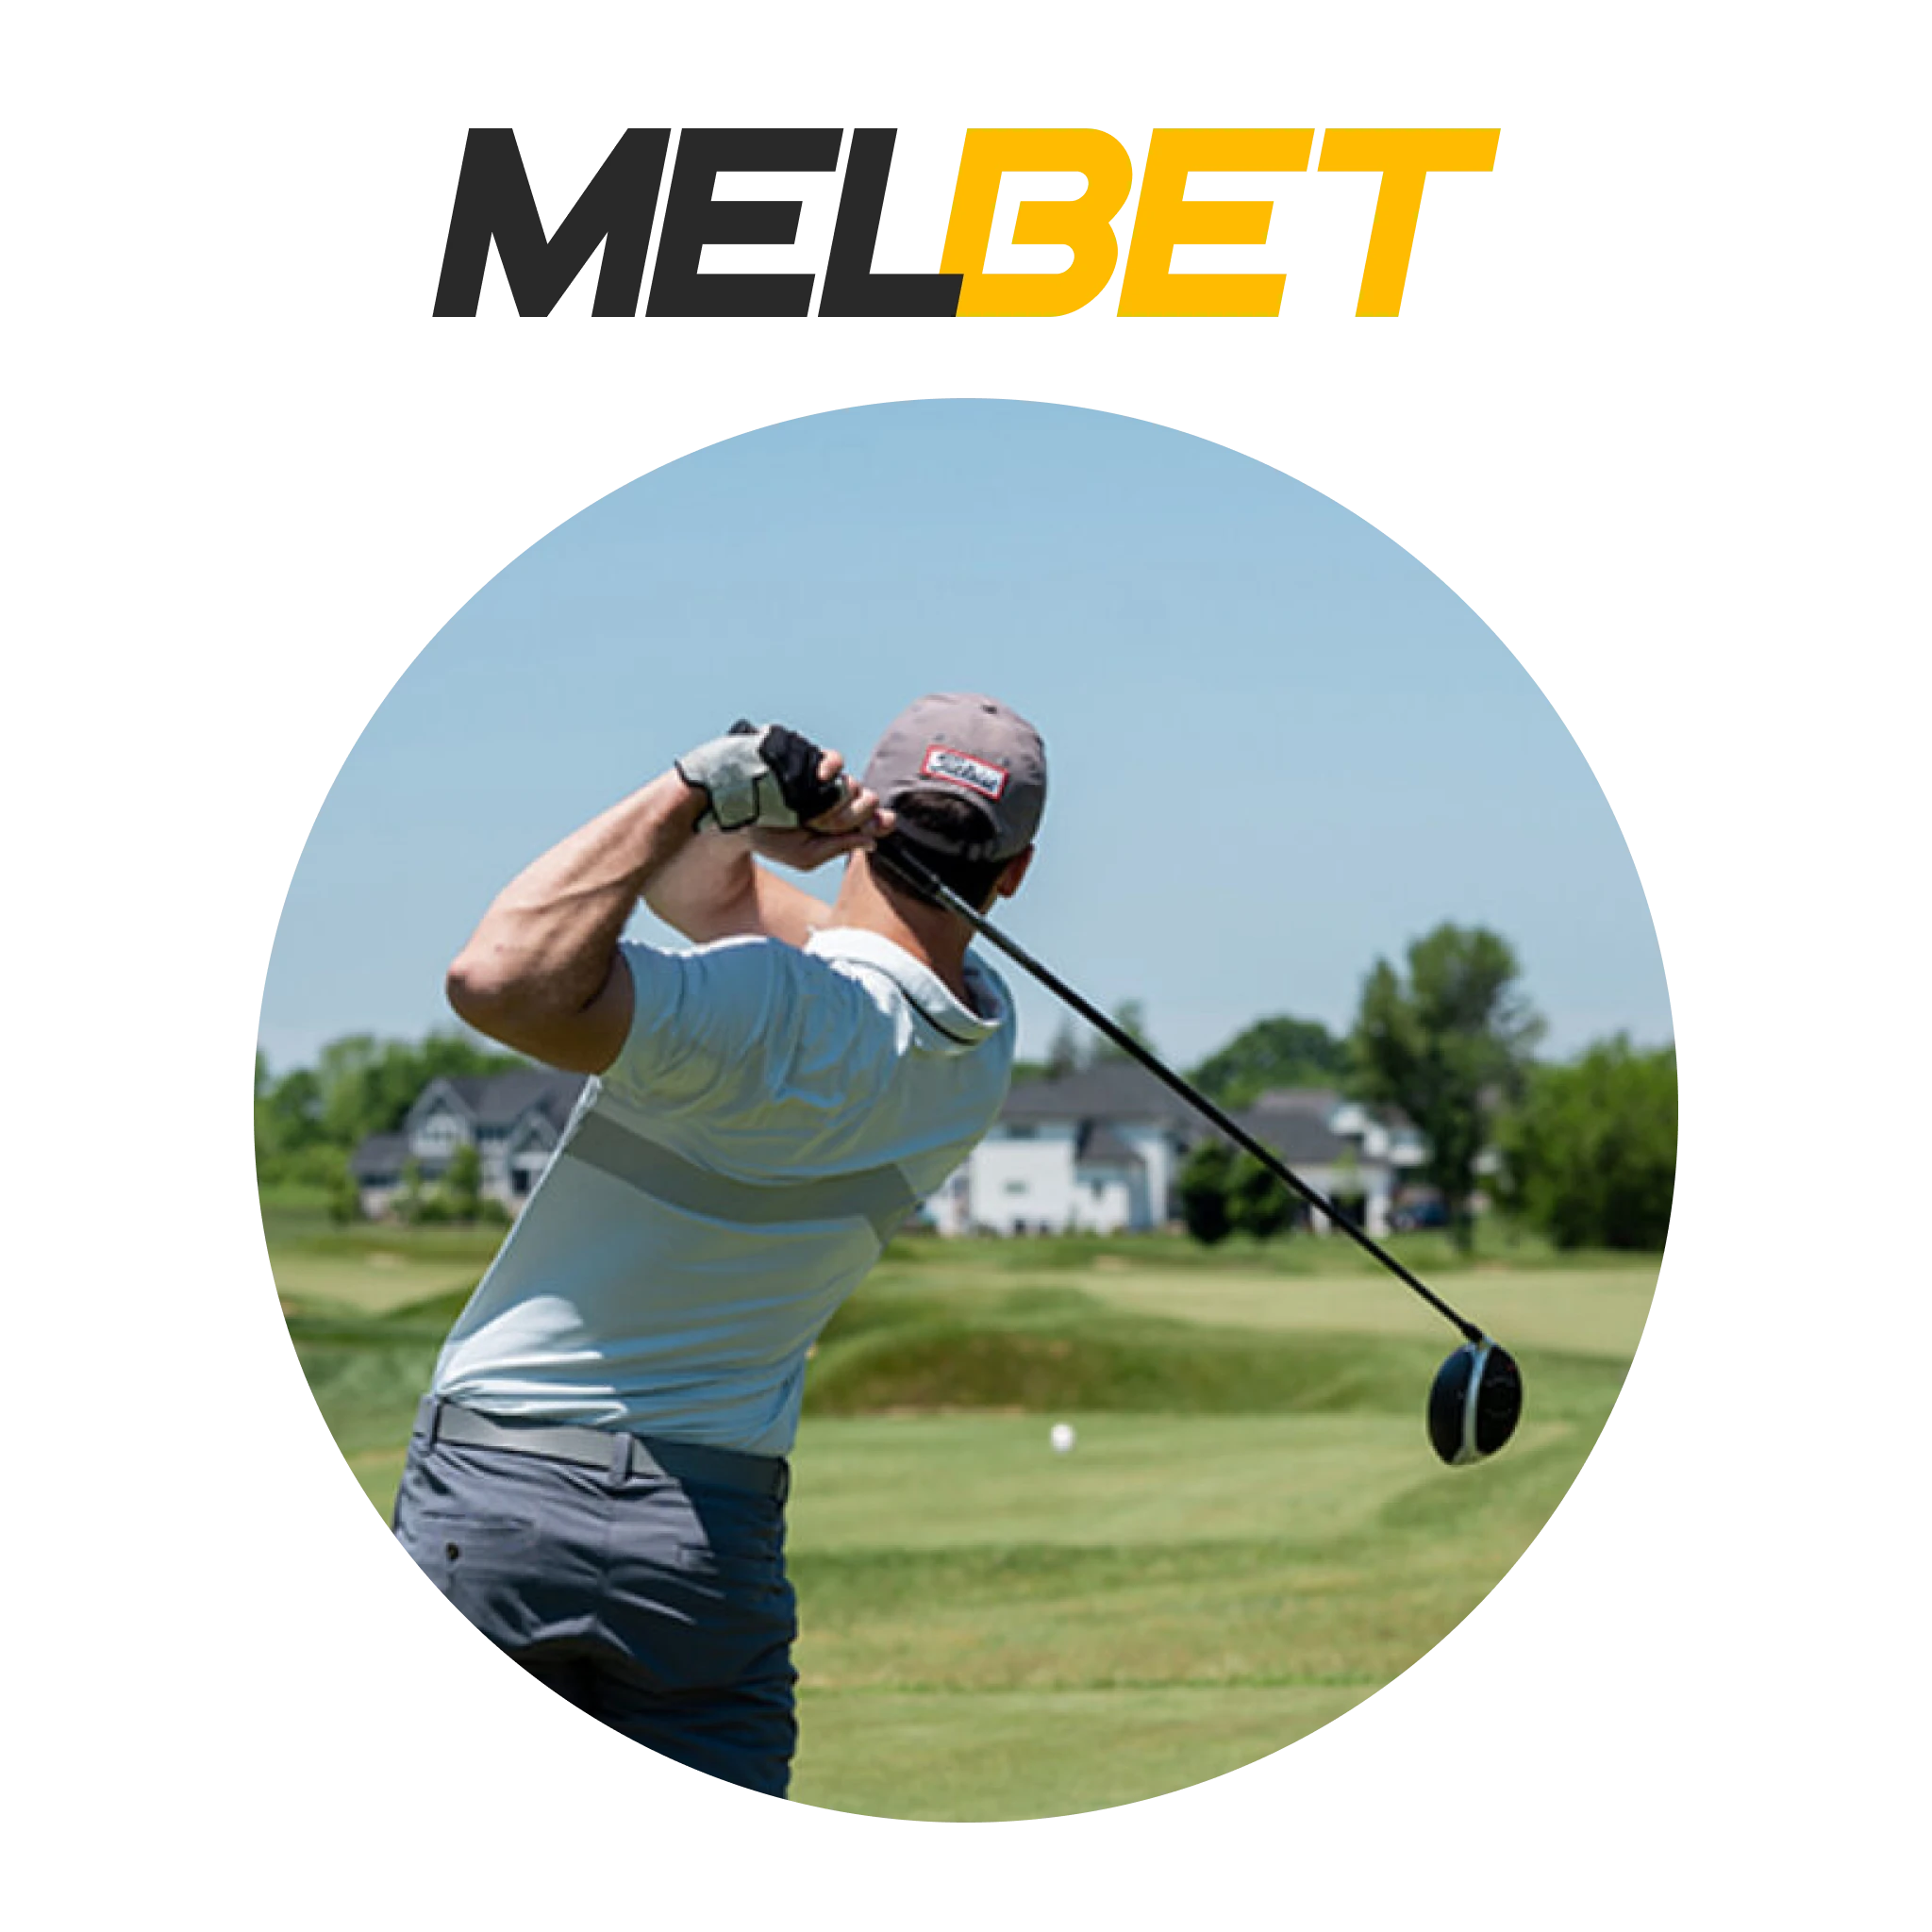 Melbet has a smart navigation bar with unique options to make golf betting more comfortable.